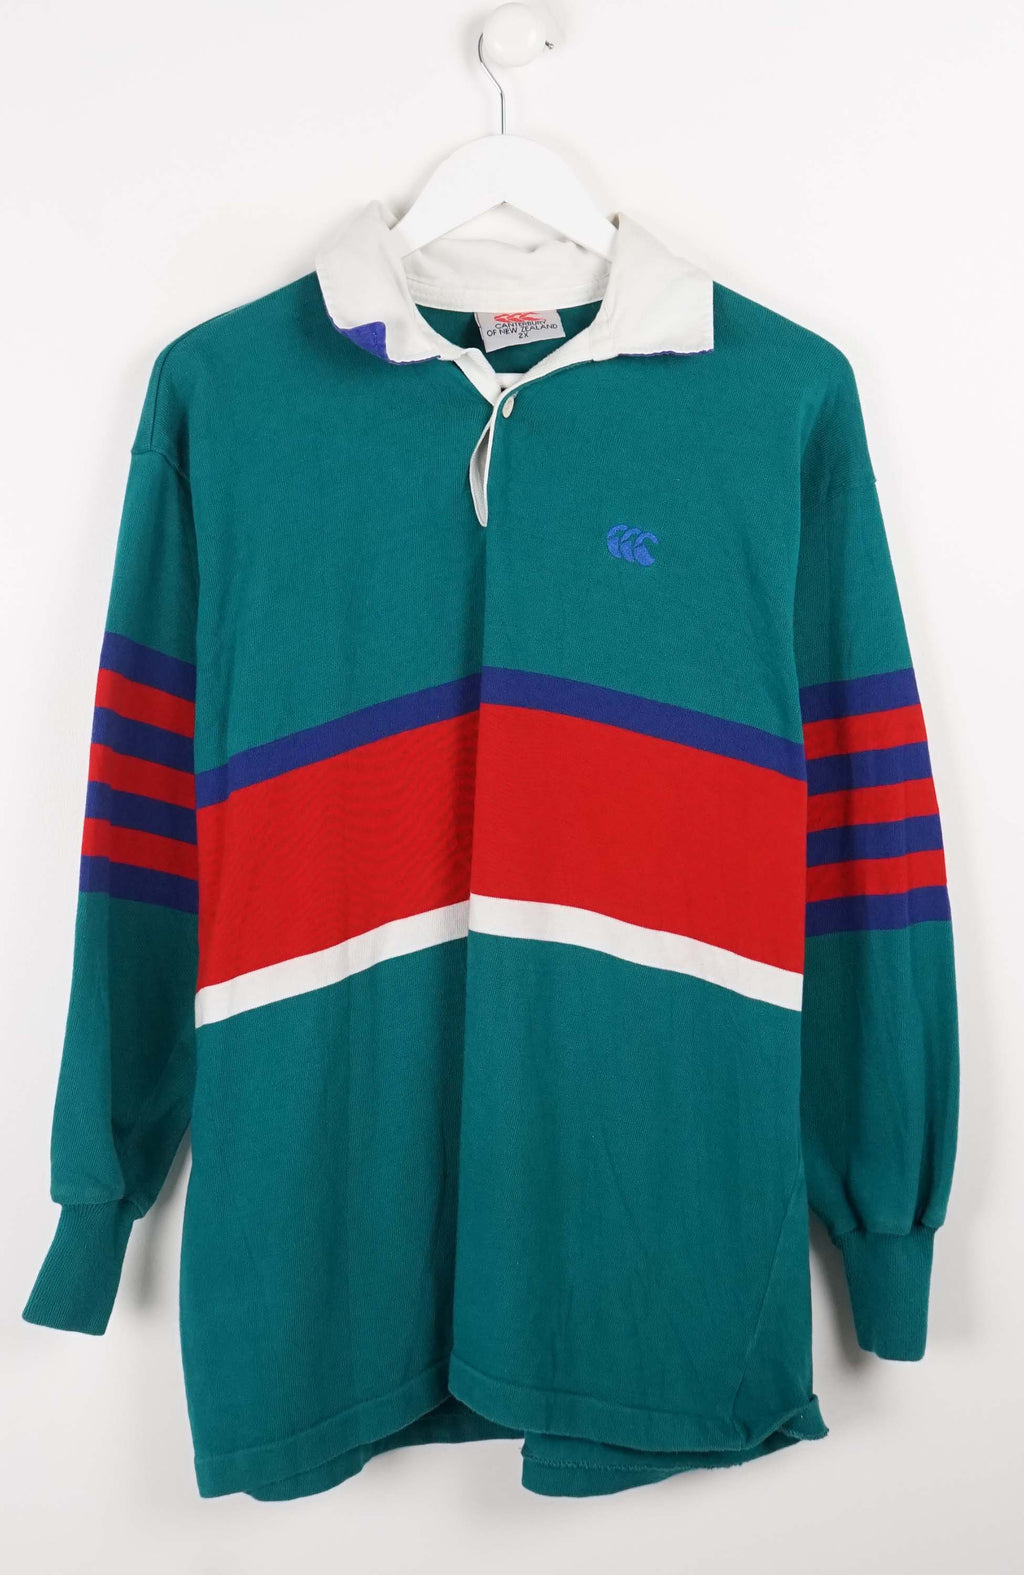 VINTAGE CANTERBURY RUGBY SWEATER (L)